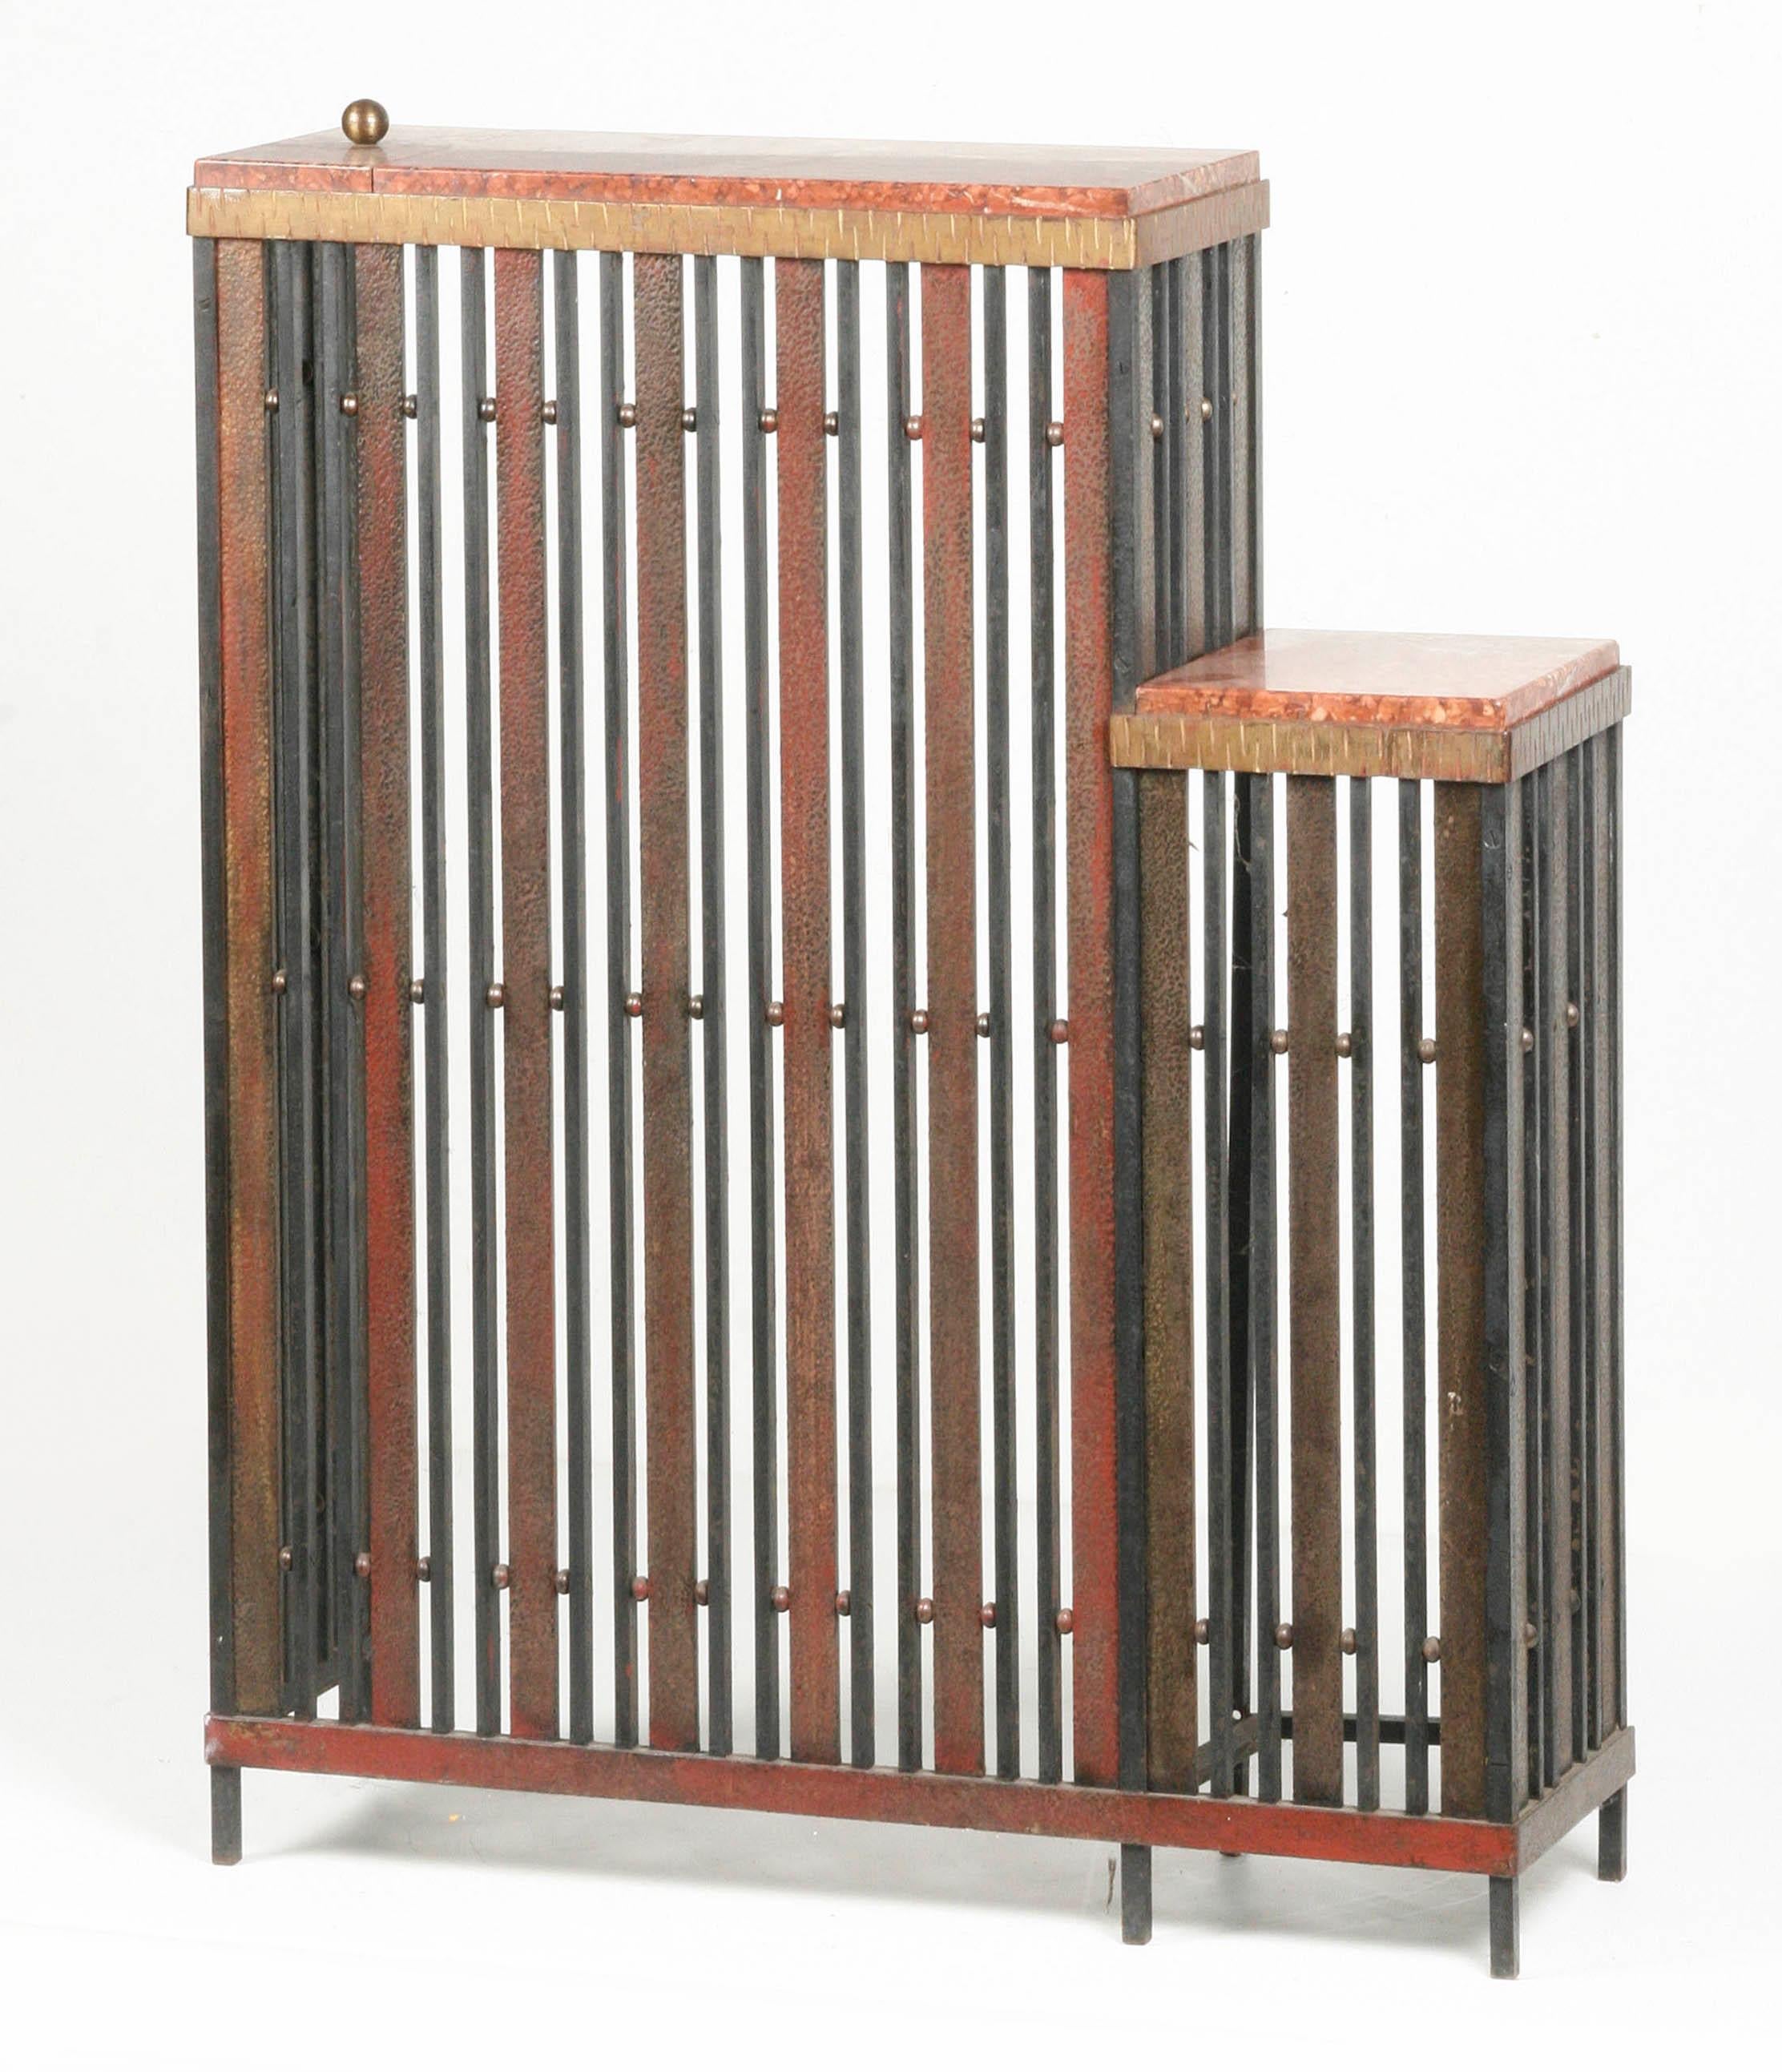 French Art Deco Radiator conversion.
Made from wrought iron with marble top.
The iron is patinated in red. This piece of furniture can possibly be used as a side table. The type of marble is 